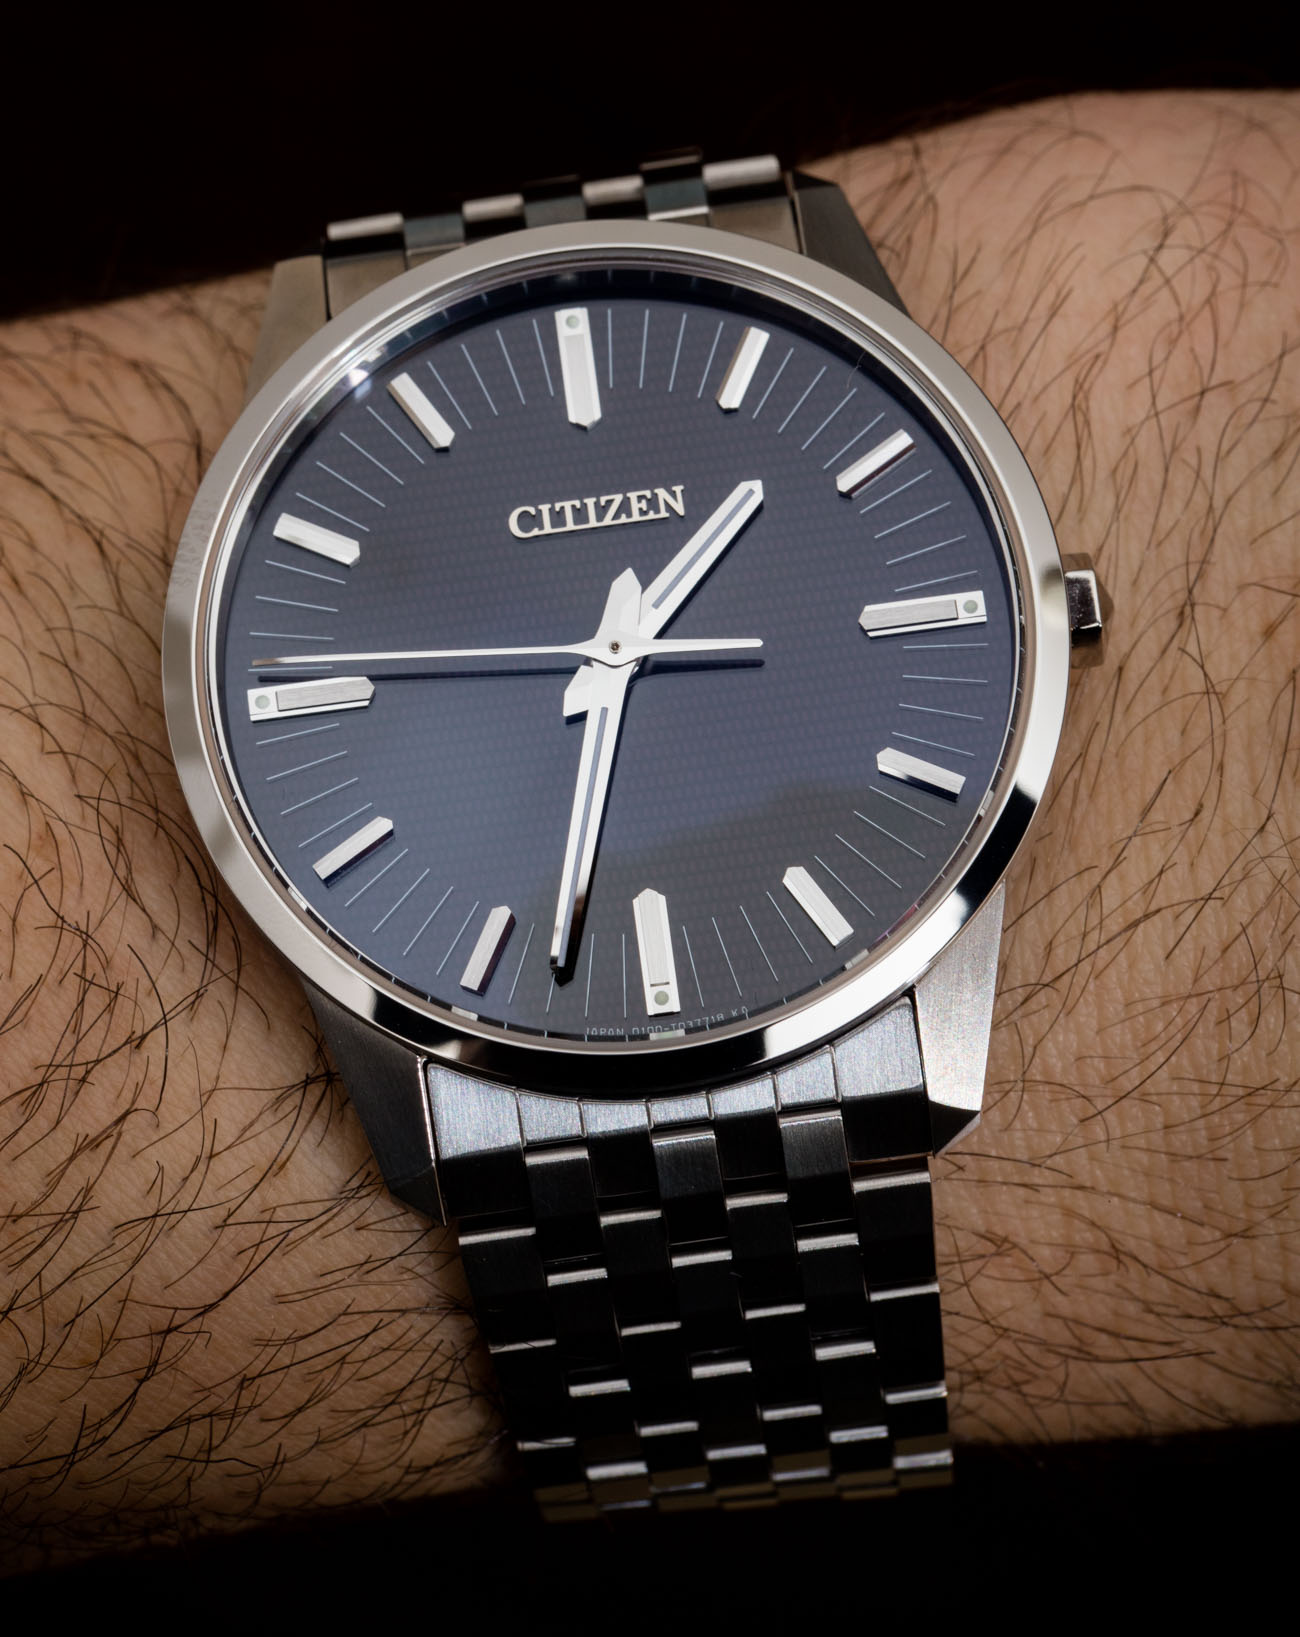 Citizen Caliber 0100 World's Most Accurate Watch Review | aBlogtoWatch